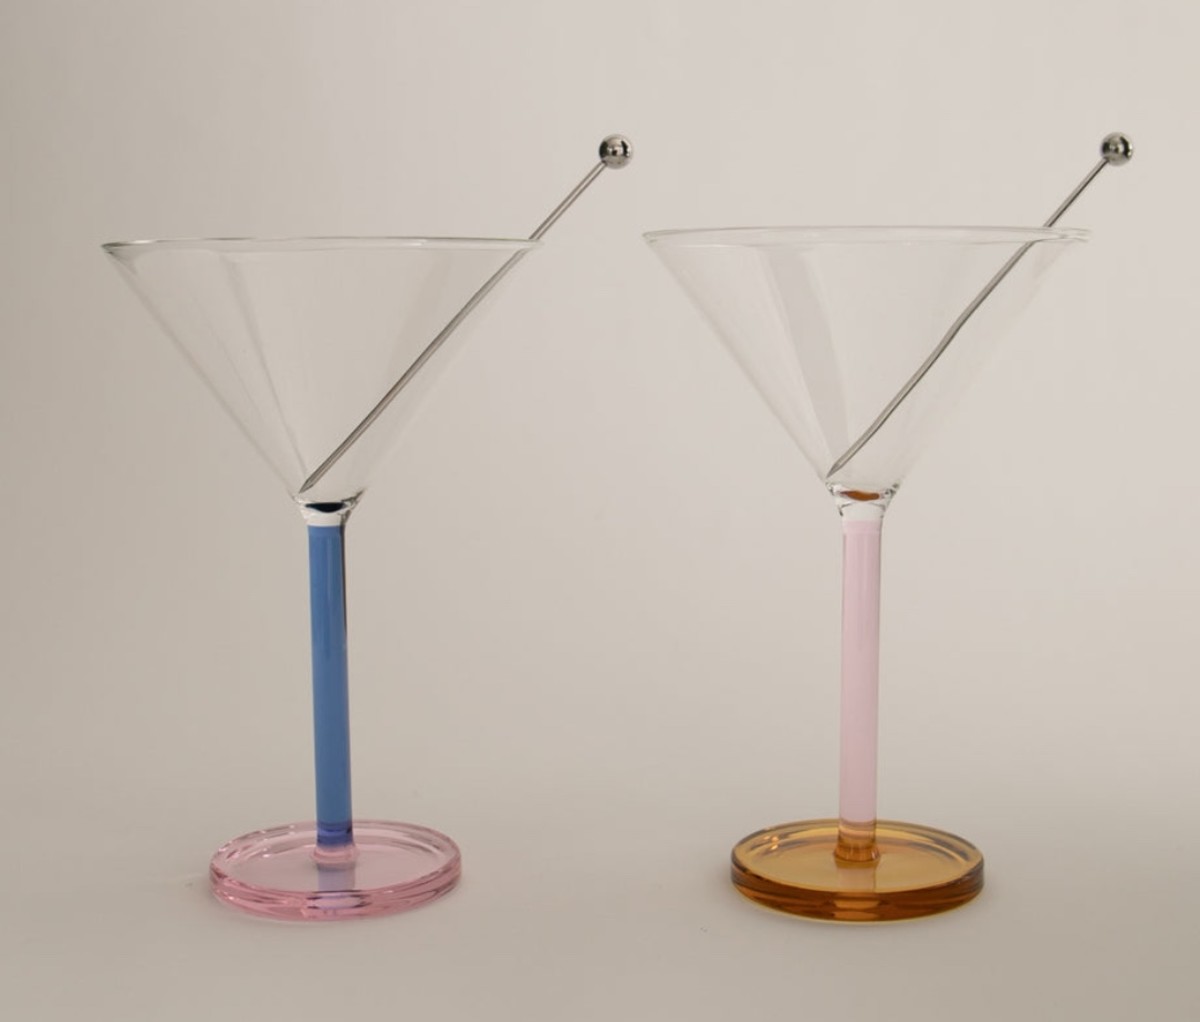 Two colorful martini-style cocktail glasses on an off-white background.